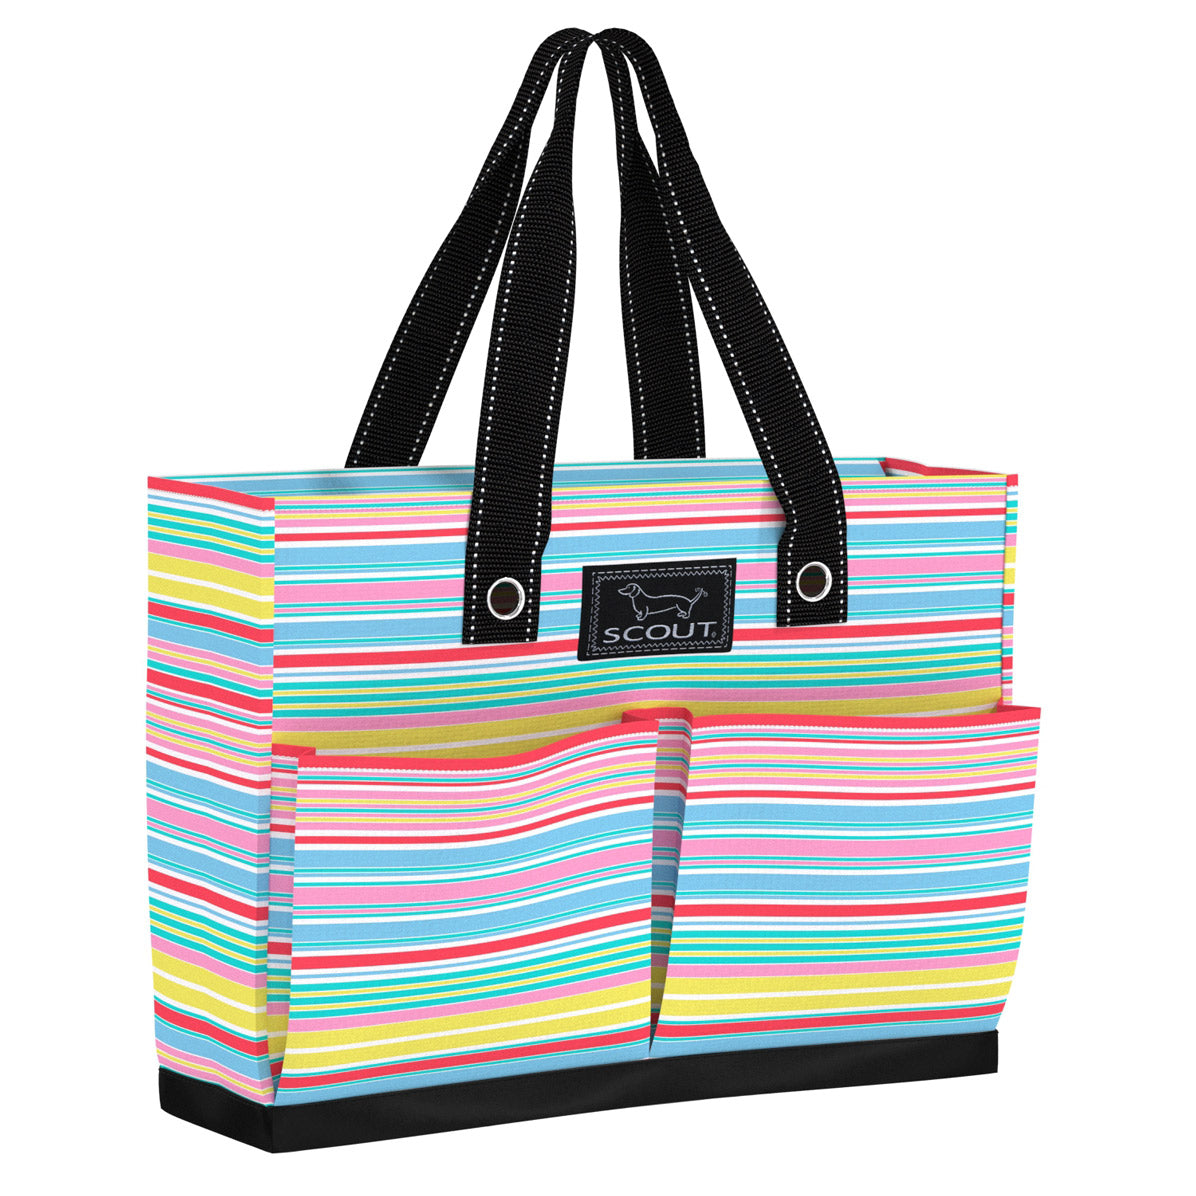 What Do You Carry In A Tote Bag? - Enviro-Tote | Custom Canvas Tote Bags -  Made in USA